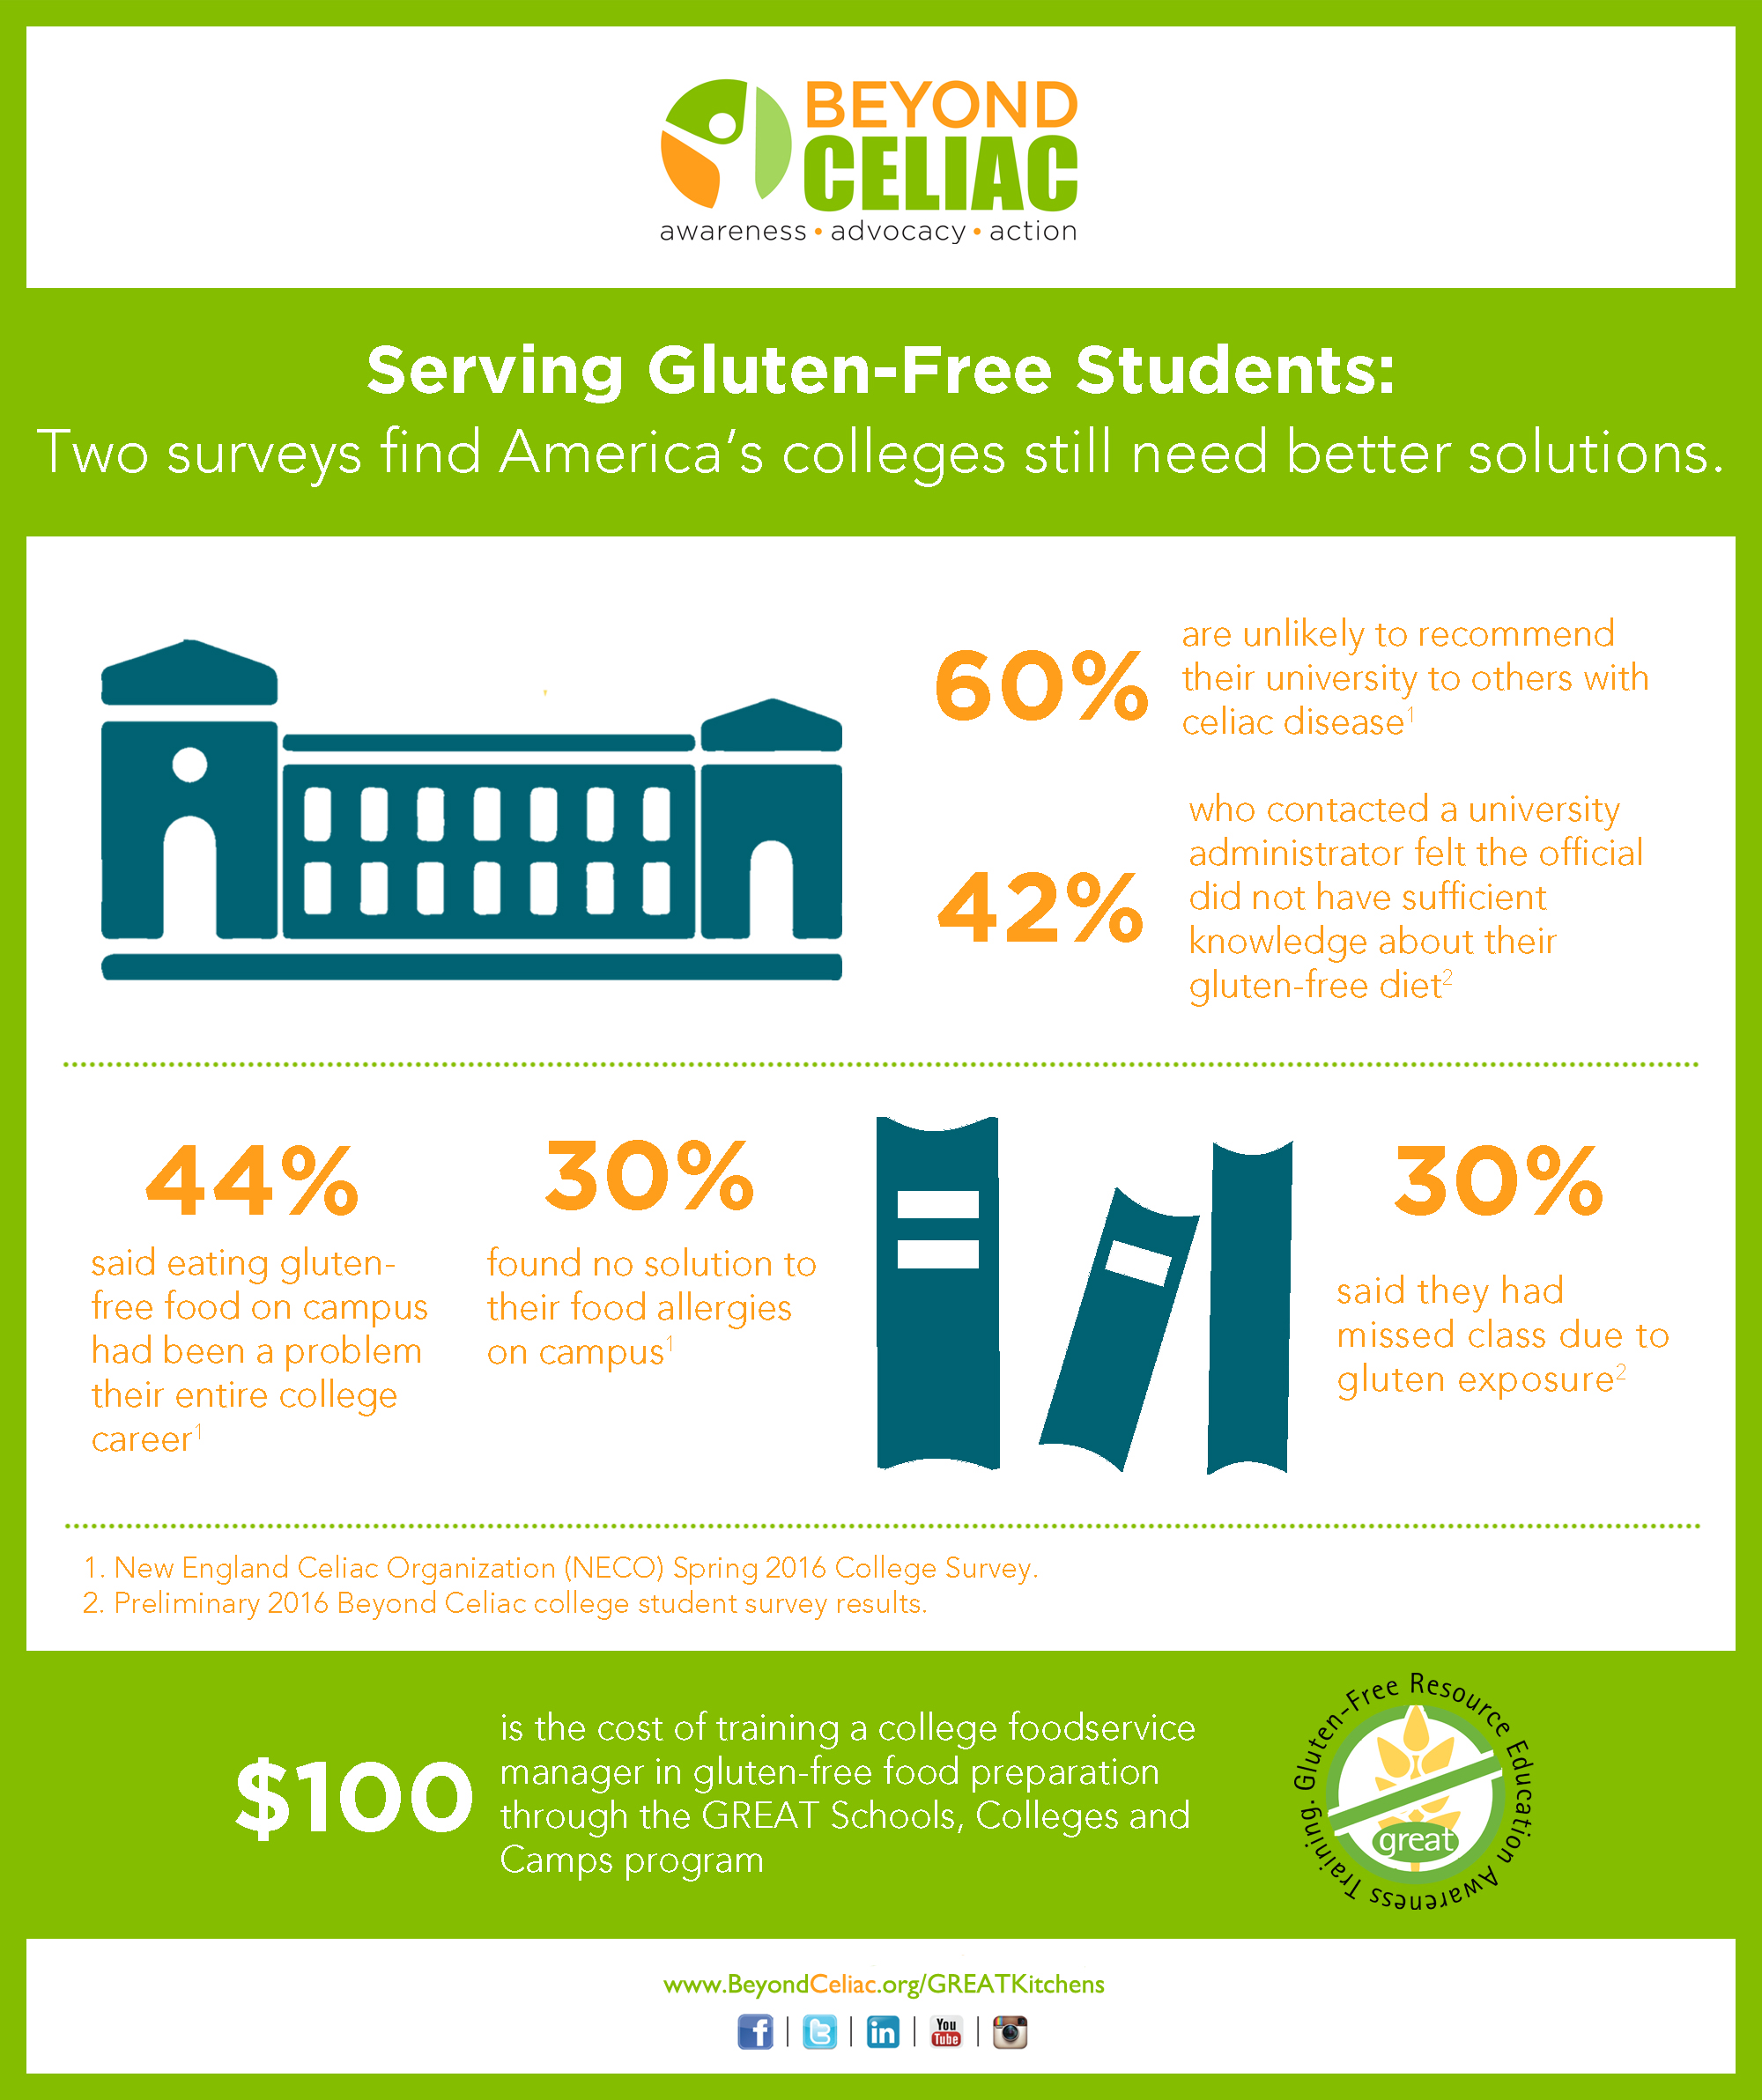 Serving Gluten-Free Students: 2 Surveys Find America's Colleges Still Need Better Solutions